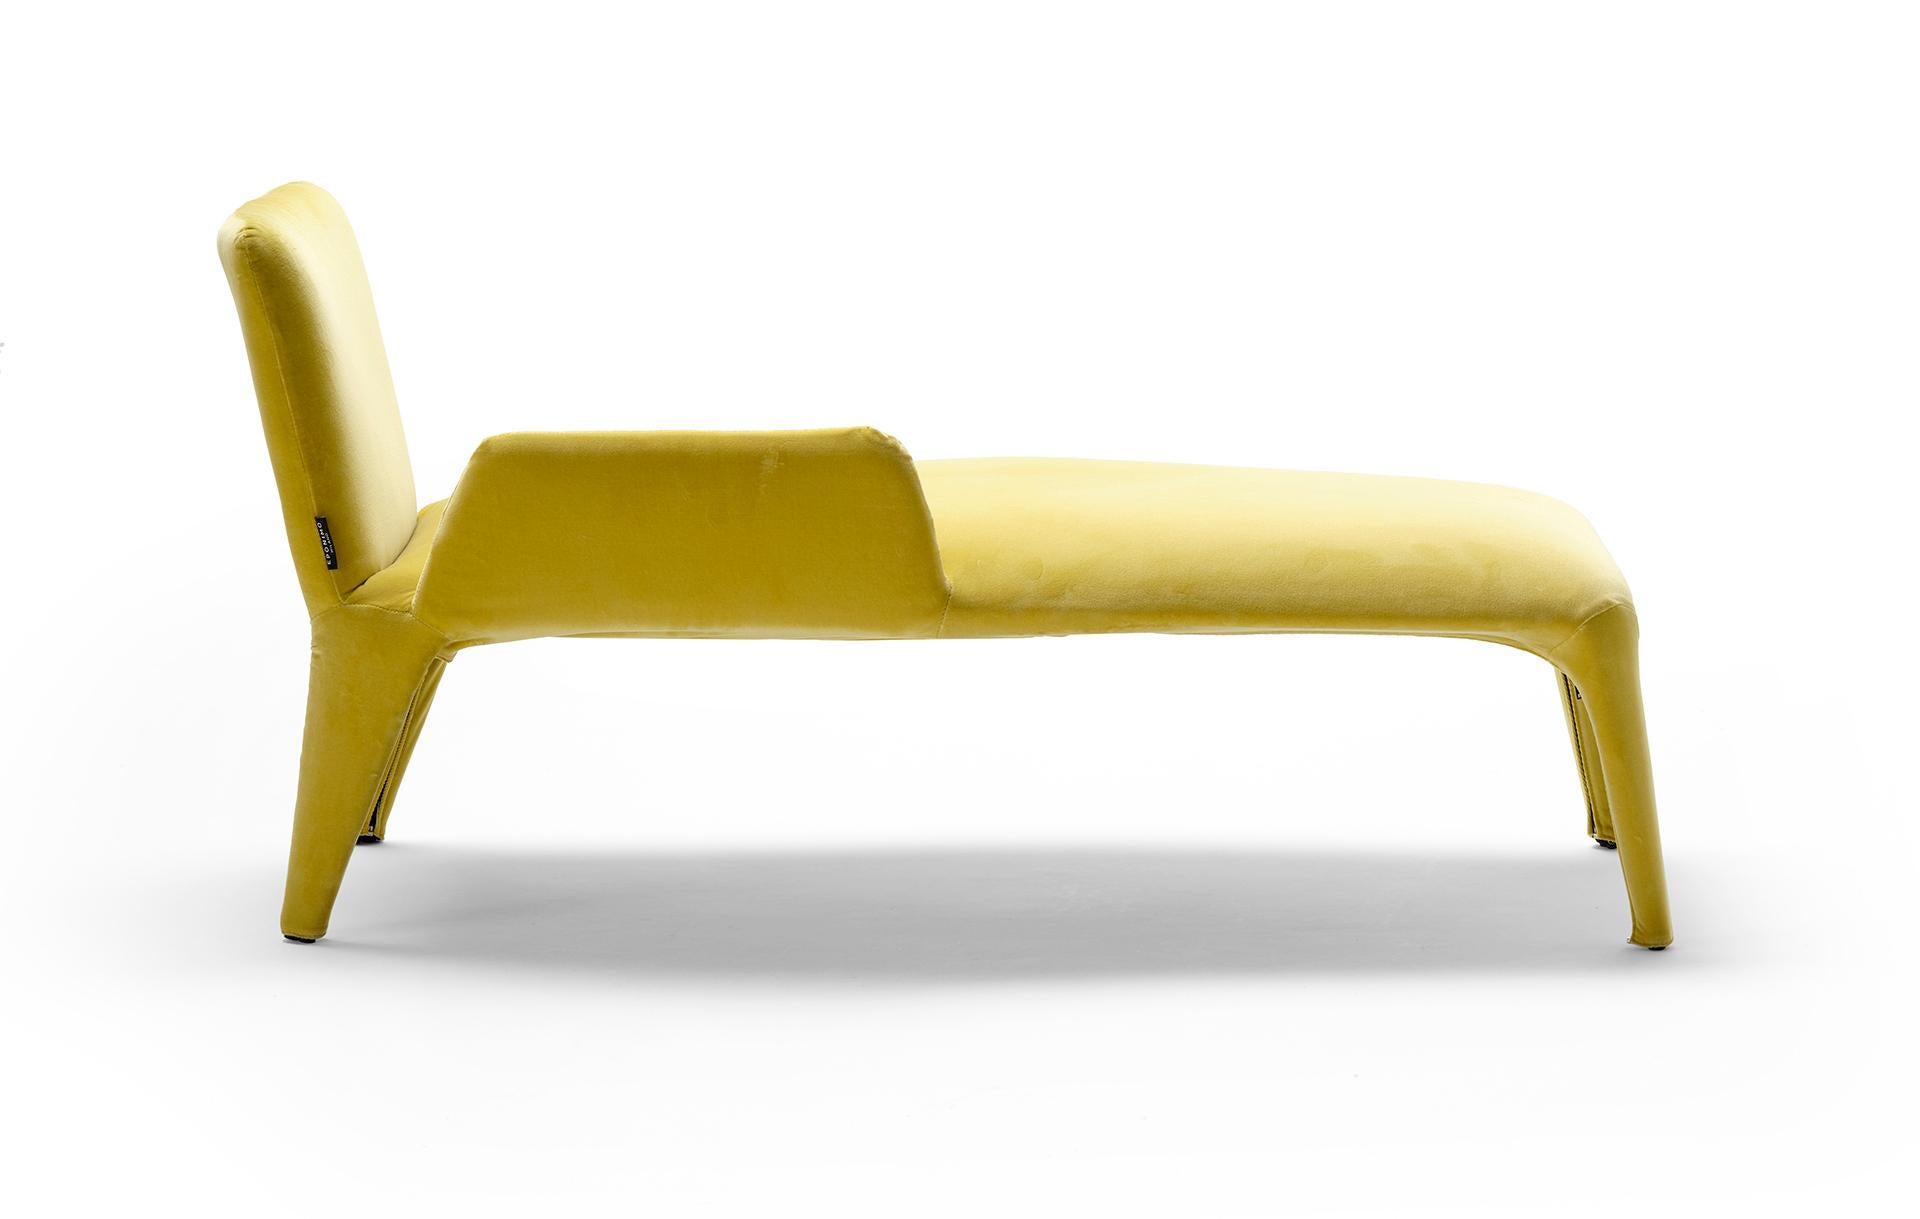 Italian 21st Century Modern Textile Chaise Longue With Removable Cover For Sale